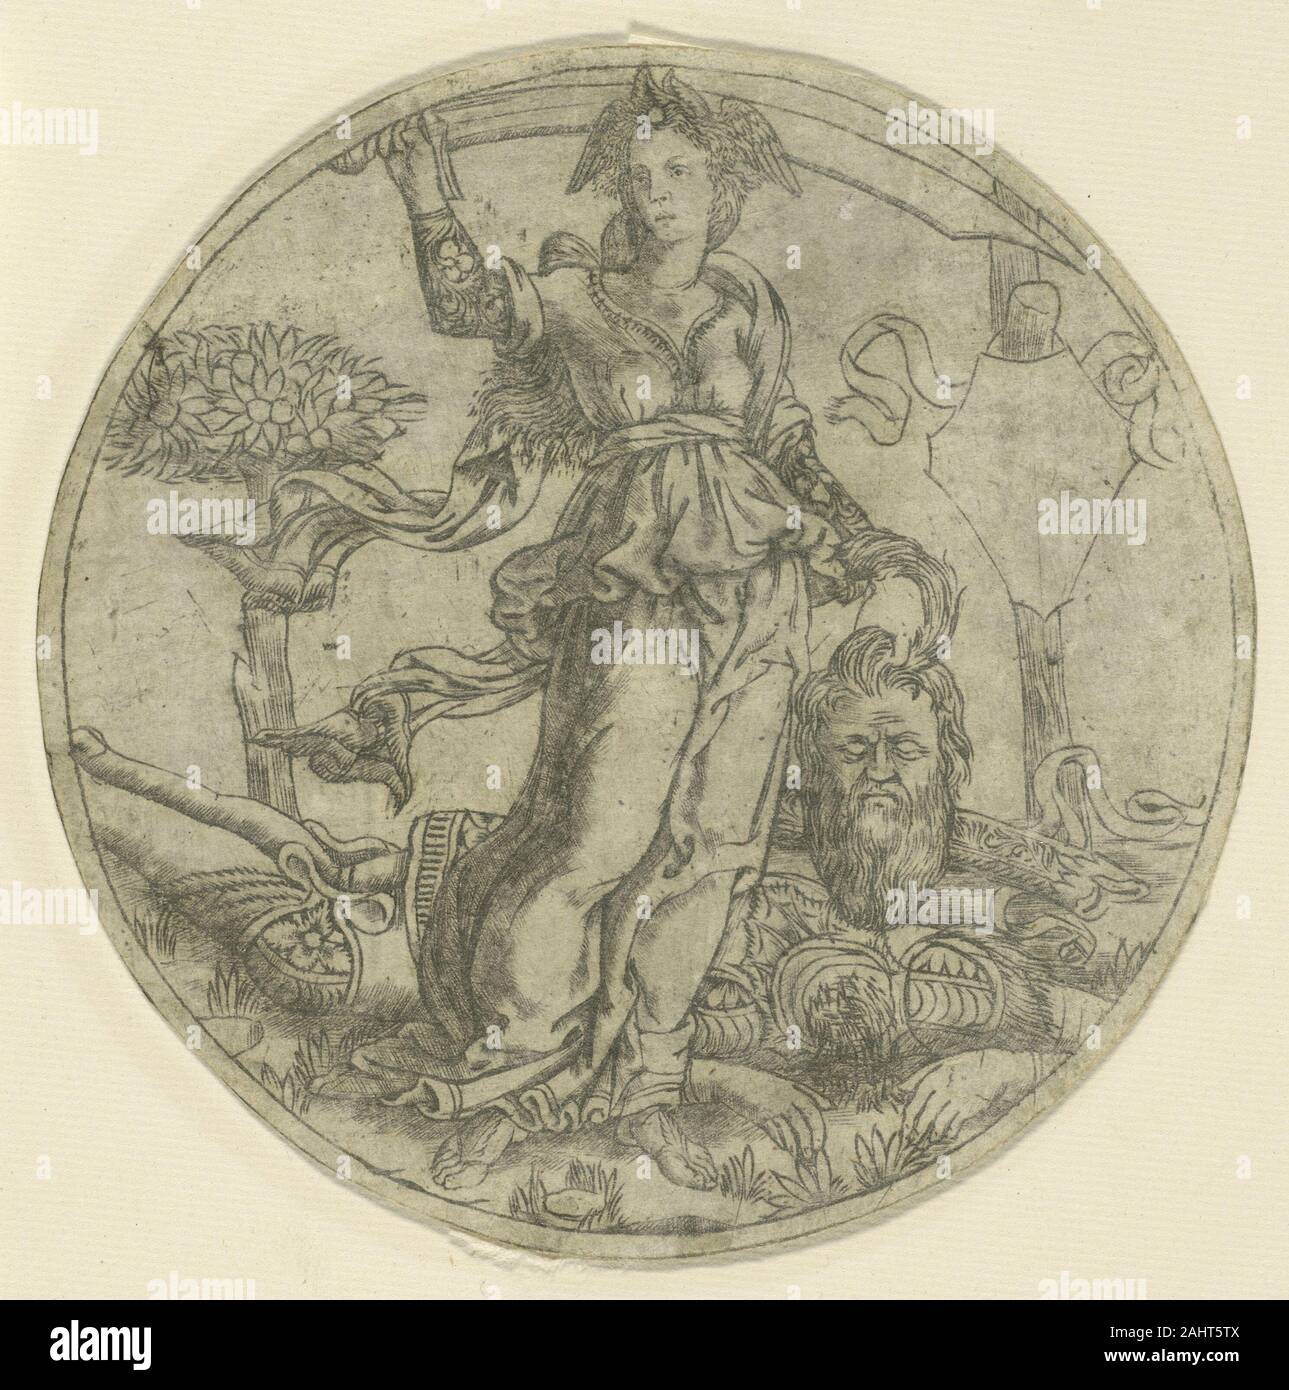 Baccio Baldini. Judith with the Head of Holofernes. 1460–1485. Italy. Engraving in blue-gray on ivory laid paper, laid down on cream laid paper This engraving was part of a group of Florentine round and oval prints with secular themes meant to be pasted on cylindrical boxes. These held sweetmeats or toiletries and were exchanged by lovers or given as wedding favors. The prints could have been colored or illuminated and completed with the recipient’s coat of arms before being affixed to boxes, though in the one displayed here the shield hanging on the tree at right remains empty. Holofernes lit Stock Photo